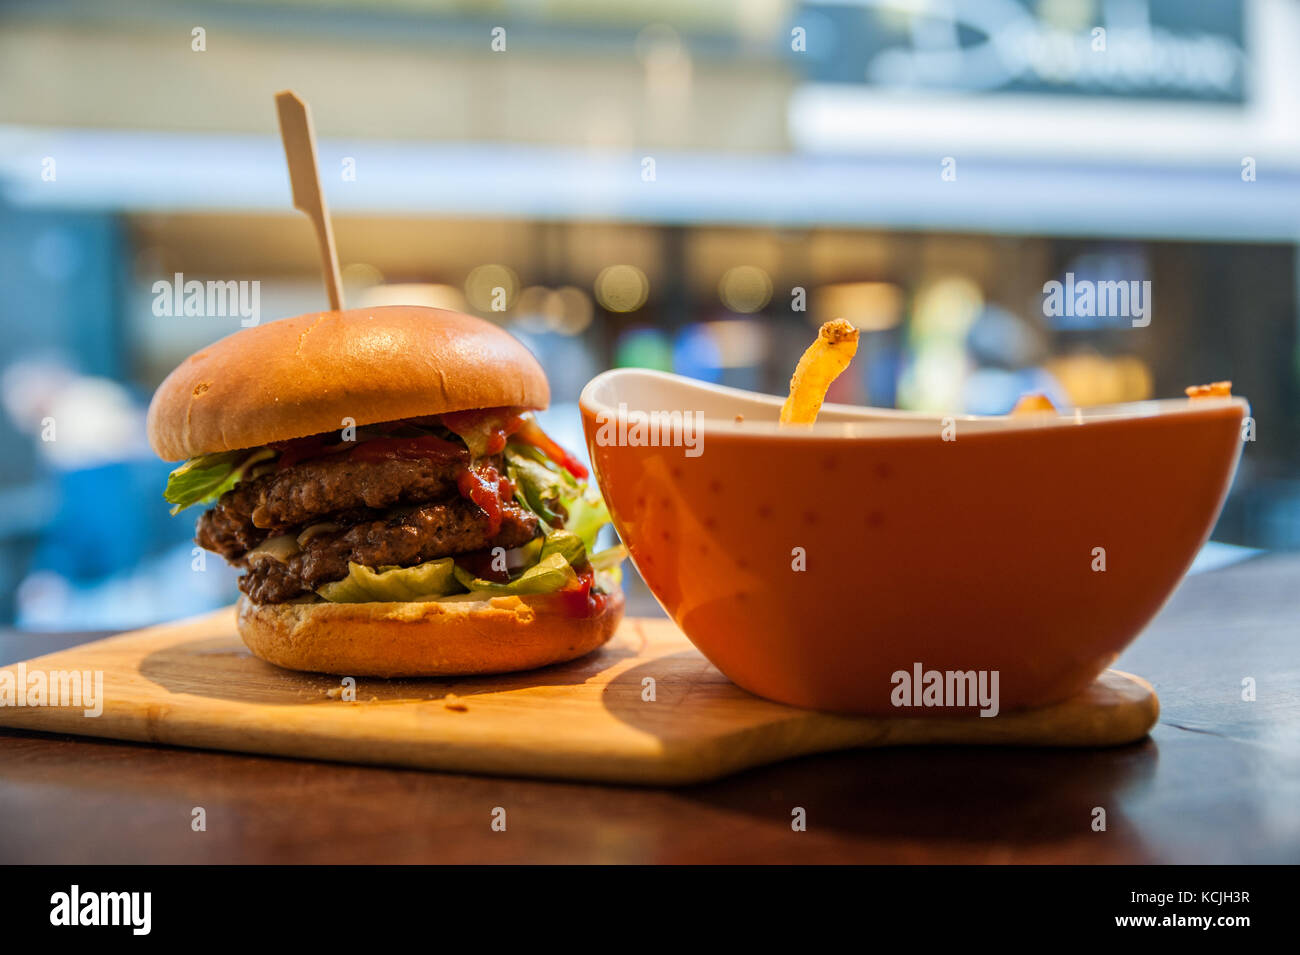 Delicious burger and french fries on the wooden chopping board Stock Photo